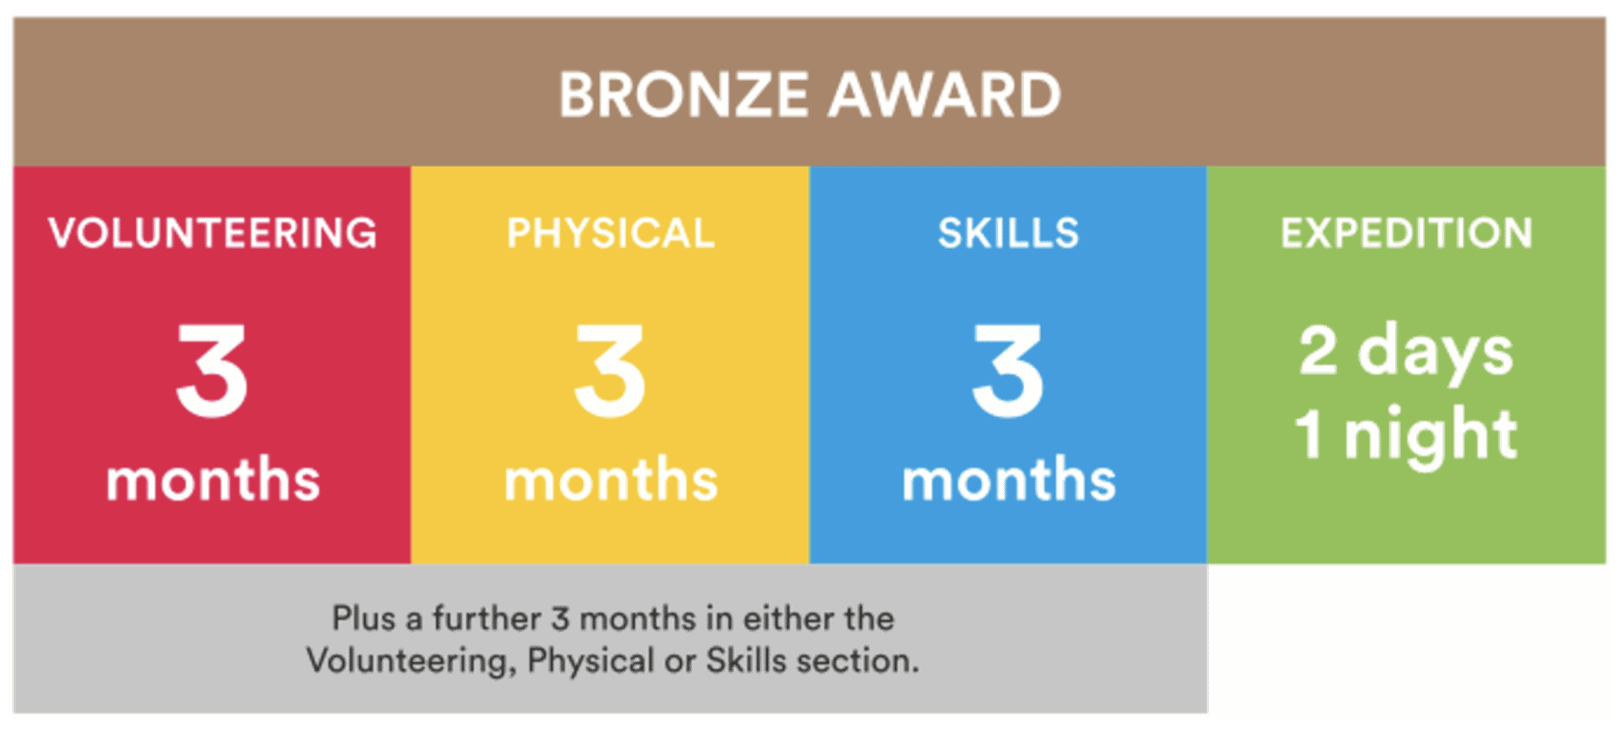 Bronze Award requirements: Volunteering 3 months Physical 3 months Skills 3 months Expedition: 2 days, 1 night. Plus an additional 3 months in either the volunteering, physical or skills section.